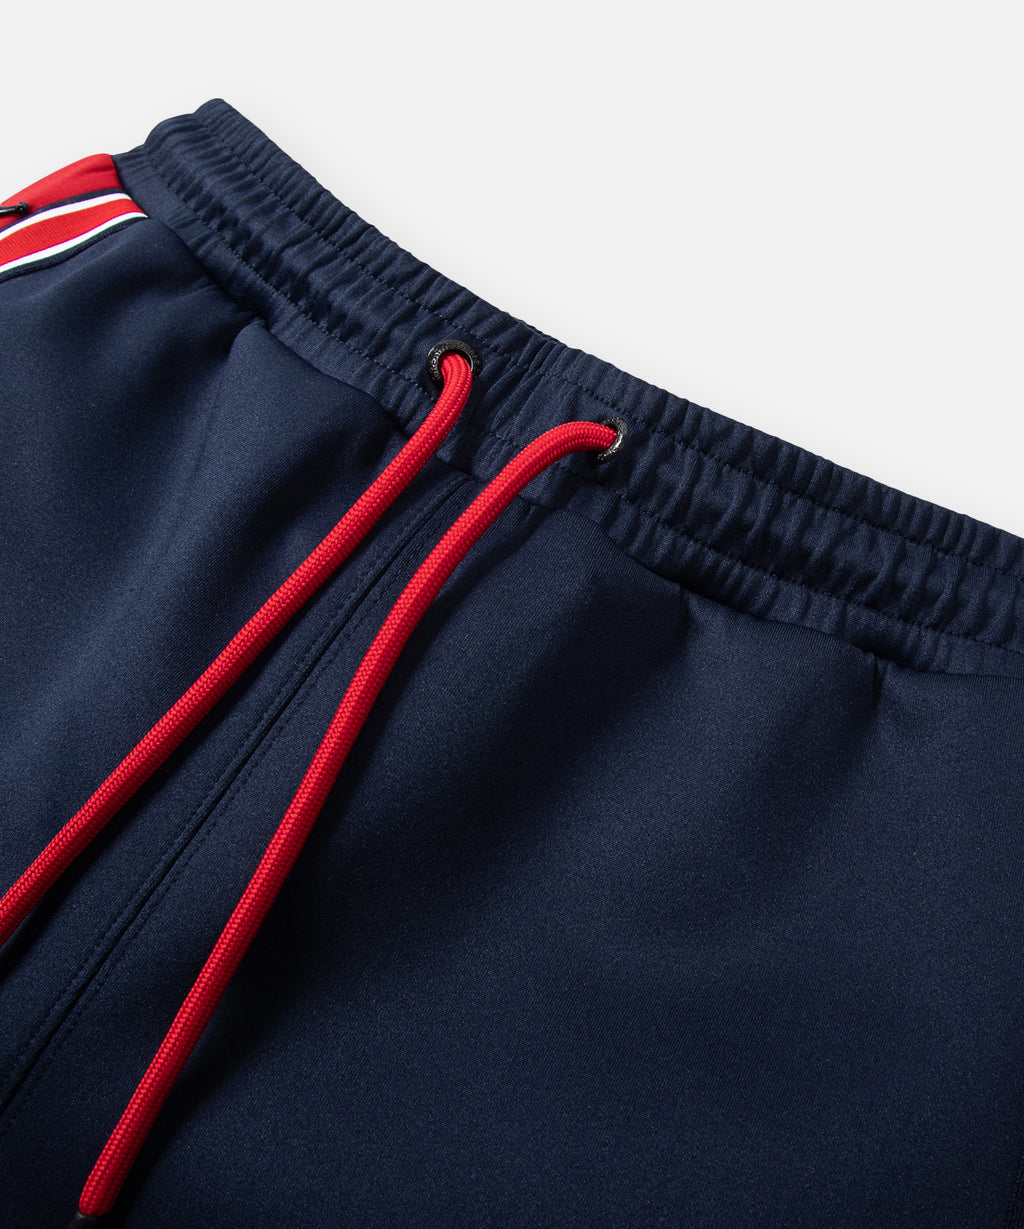  Drawcord waistband on Paper Planes Basketball Short color Midnight.